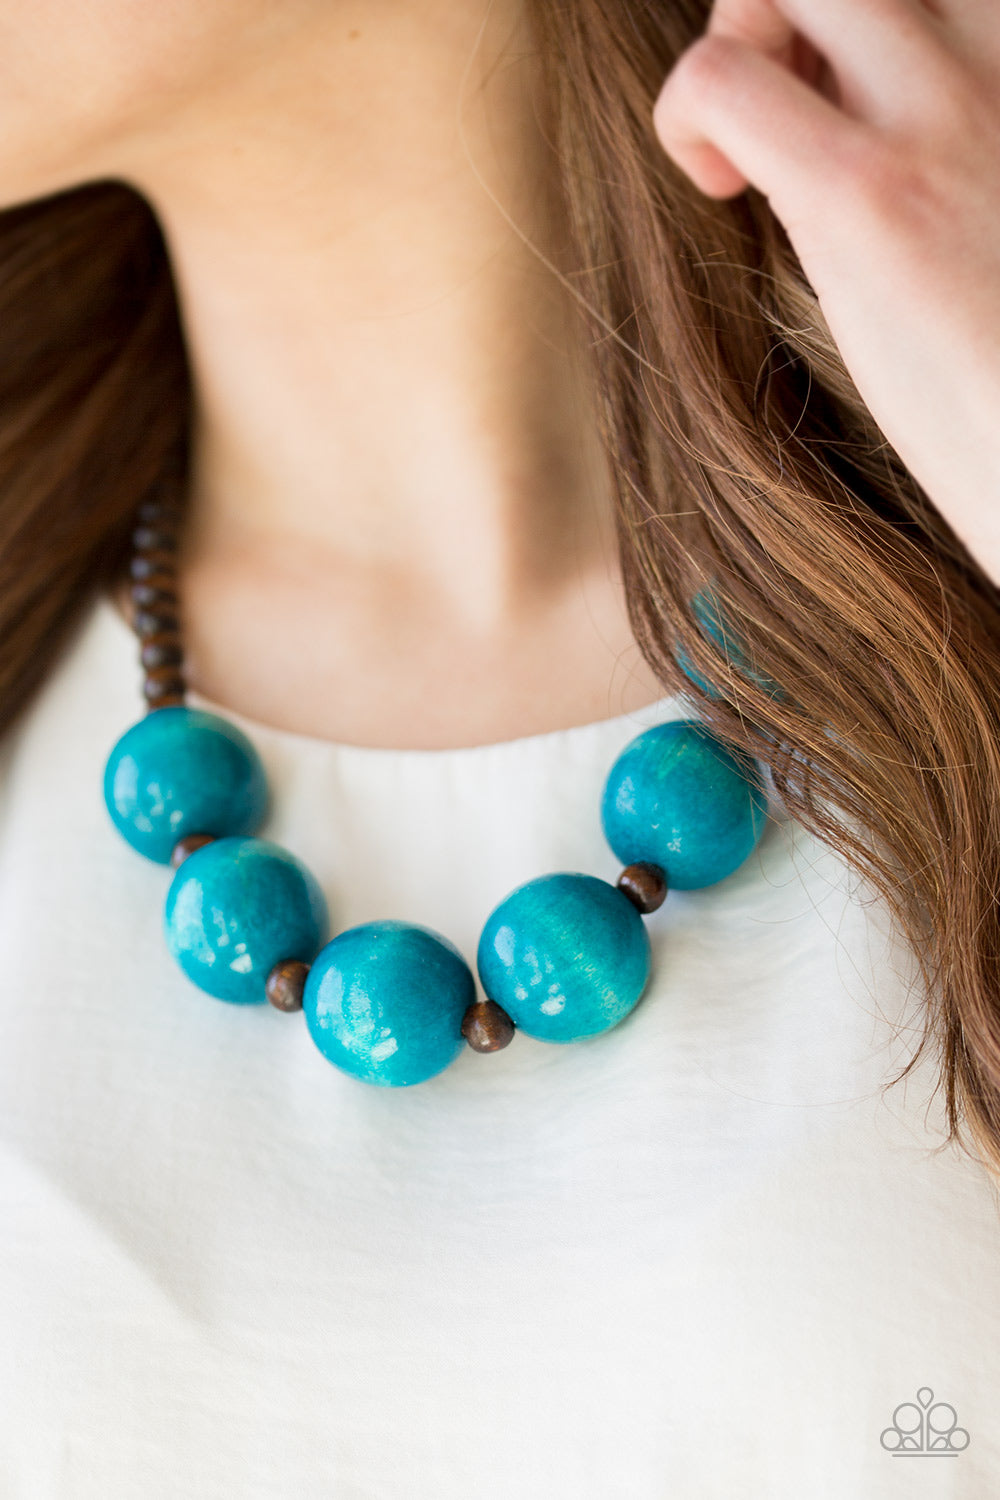 Oh My Miami Blue
Wooden Necklace - Daria's Blings N Things